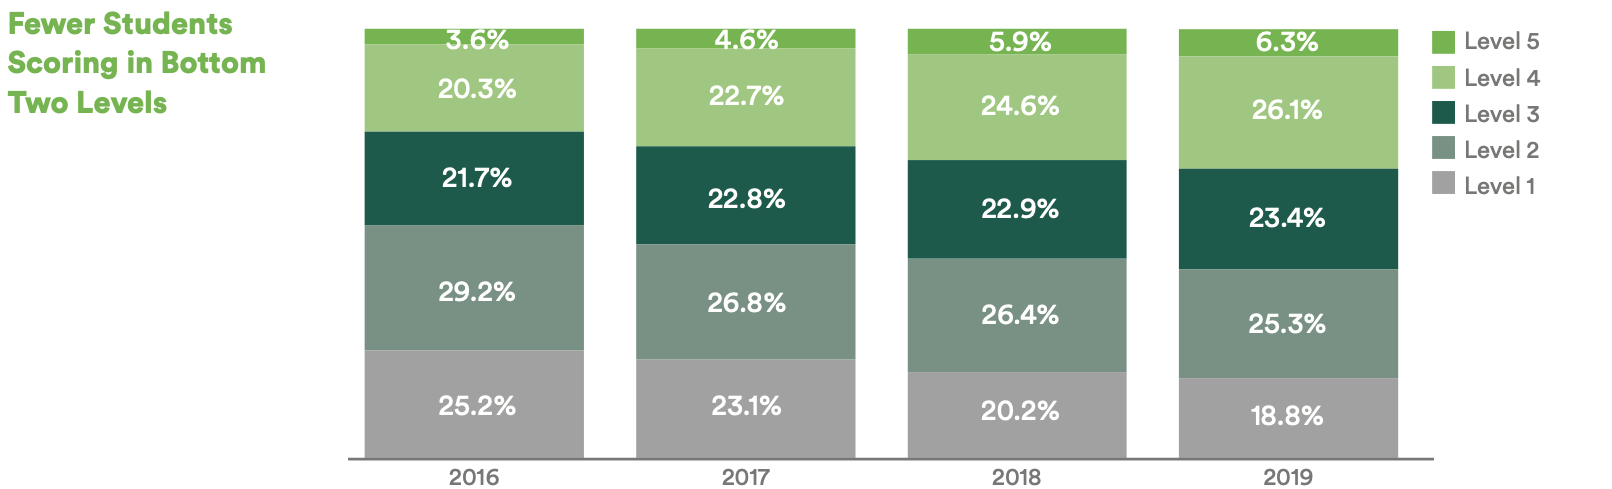 A stacked bar chart with four bars, one for each year – 2016, 2017, 2018, and 2019 – that depicts student performance on the math assessment by level. The percentage of students scoring in the lowest two levels is decreasing year over year. 